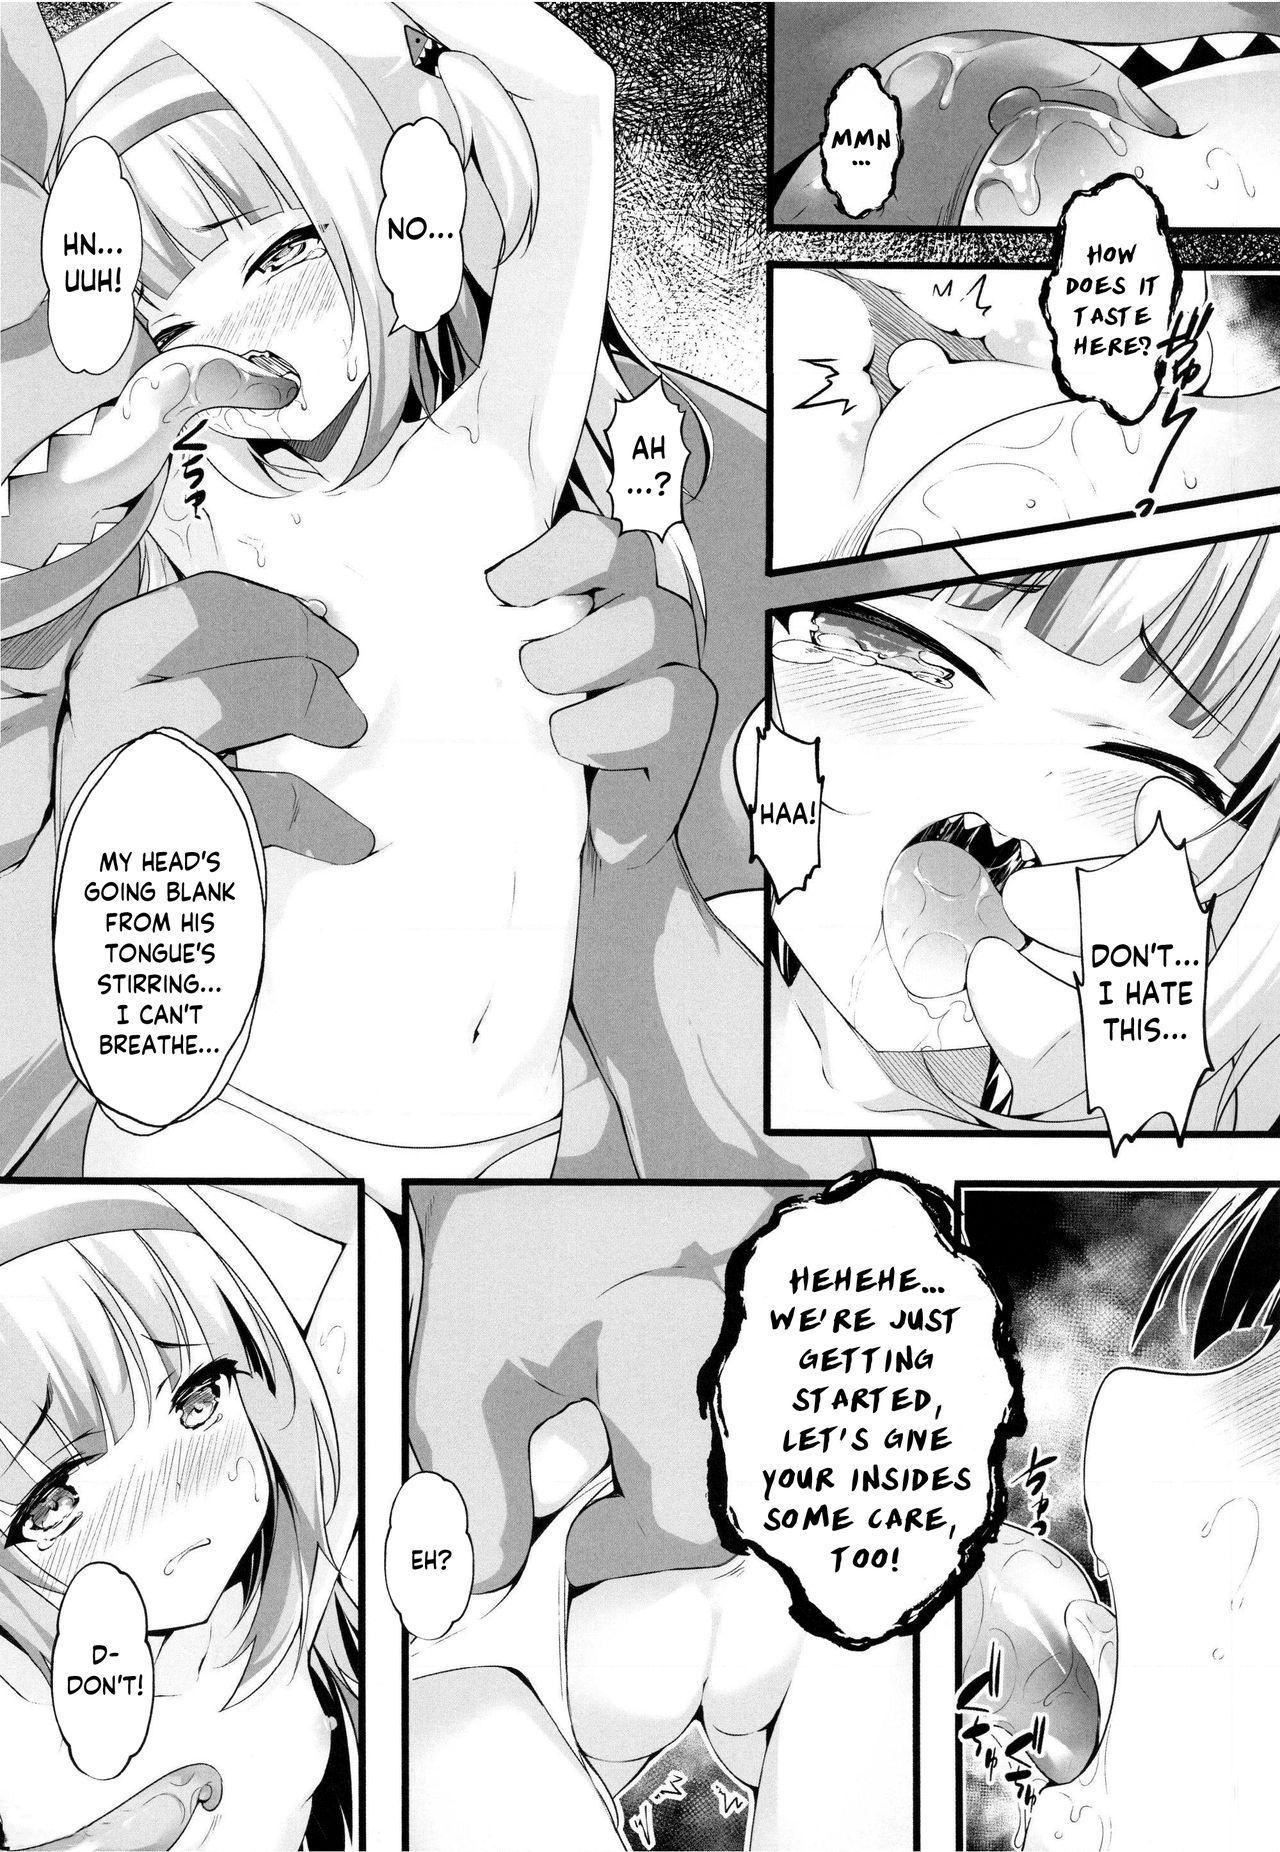 Women Sucking Dick Lets Sweat - Hololive Ring fit adventure Party - Page 7